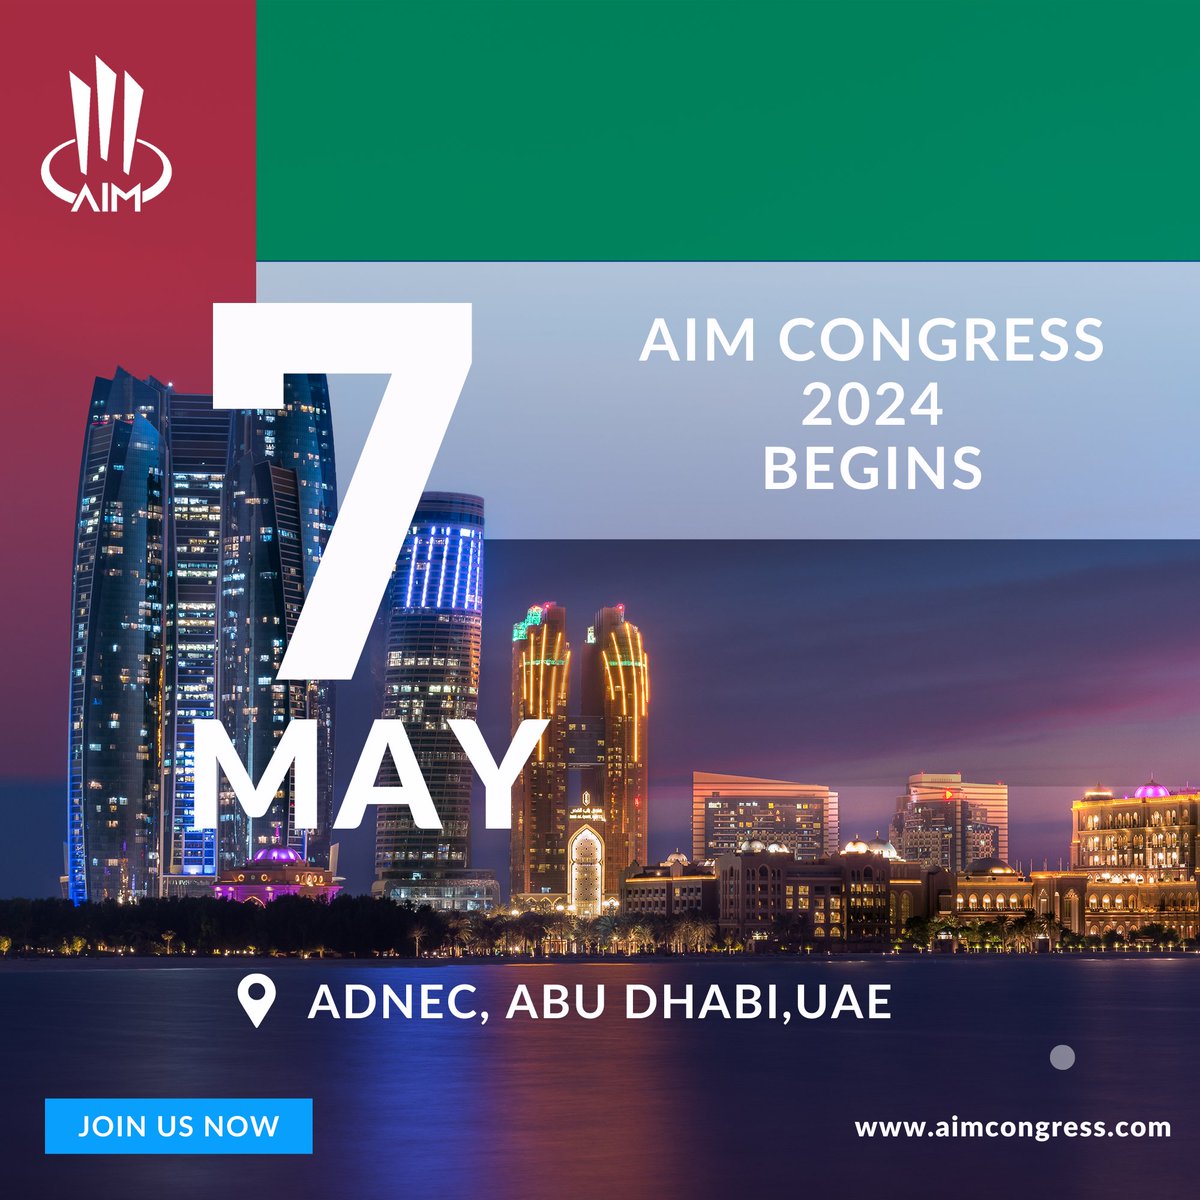 Today marks the beginning of AIM Congress 2024, the pinnacle event for global investors, entrepreneurs, and thought leaders.

#AIMCongress2024 #InvestmentLeadership #GlobalImpact #EconomicGrowth